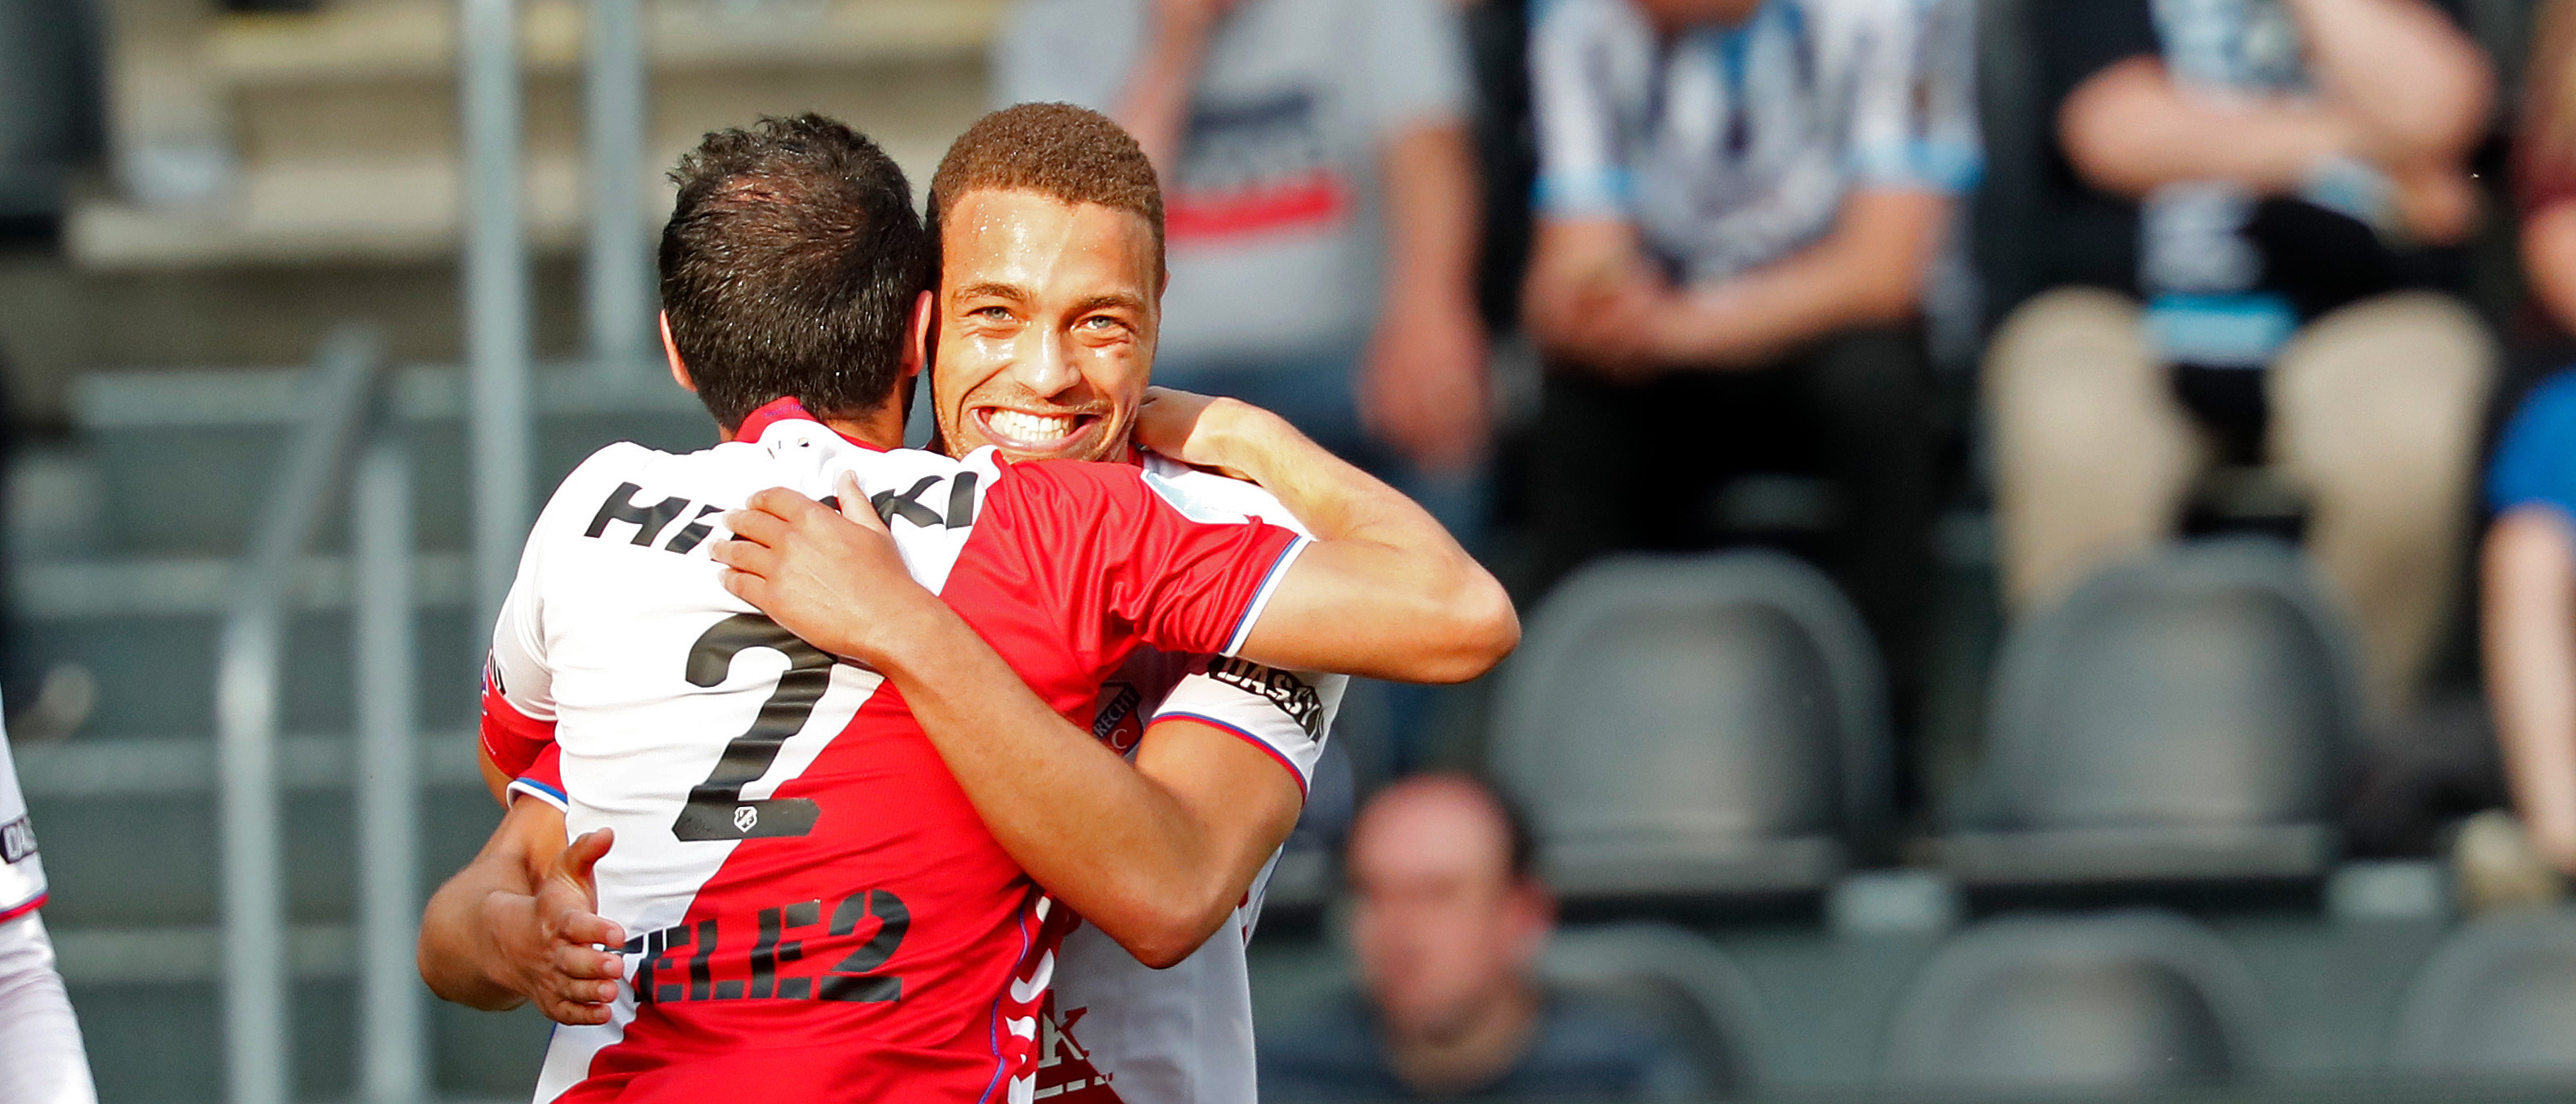 FC Utrecht take care of business in Almelo